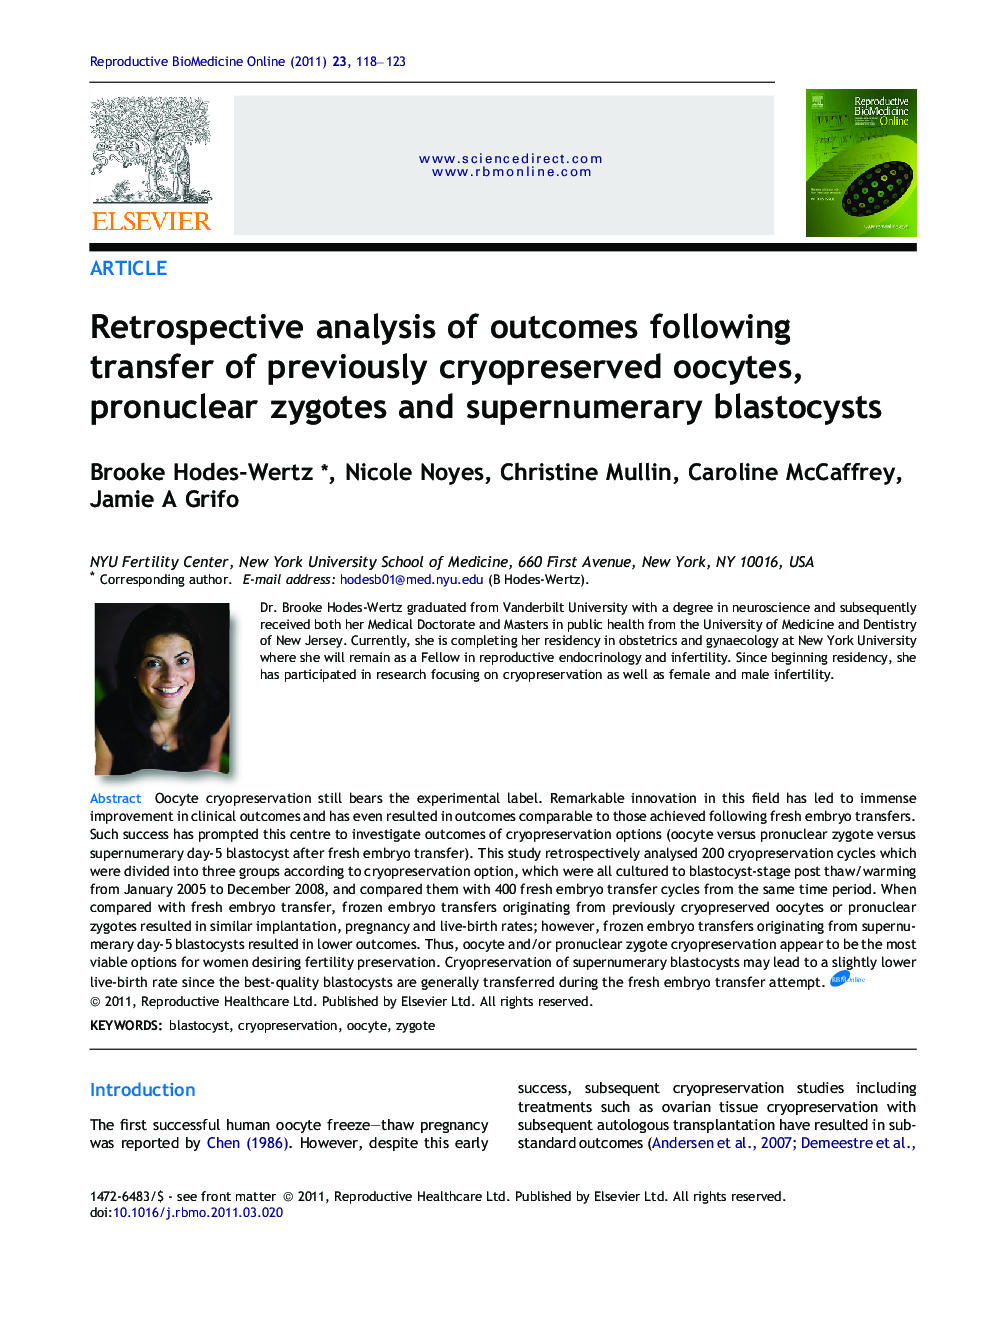 Retrospective analysis of outcomes following transfer of previously cryopreserved oocytes, pronuclear zygotes and supernumerary blastocysts 